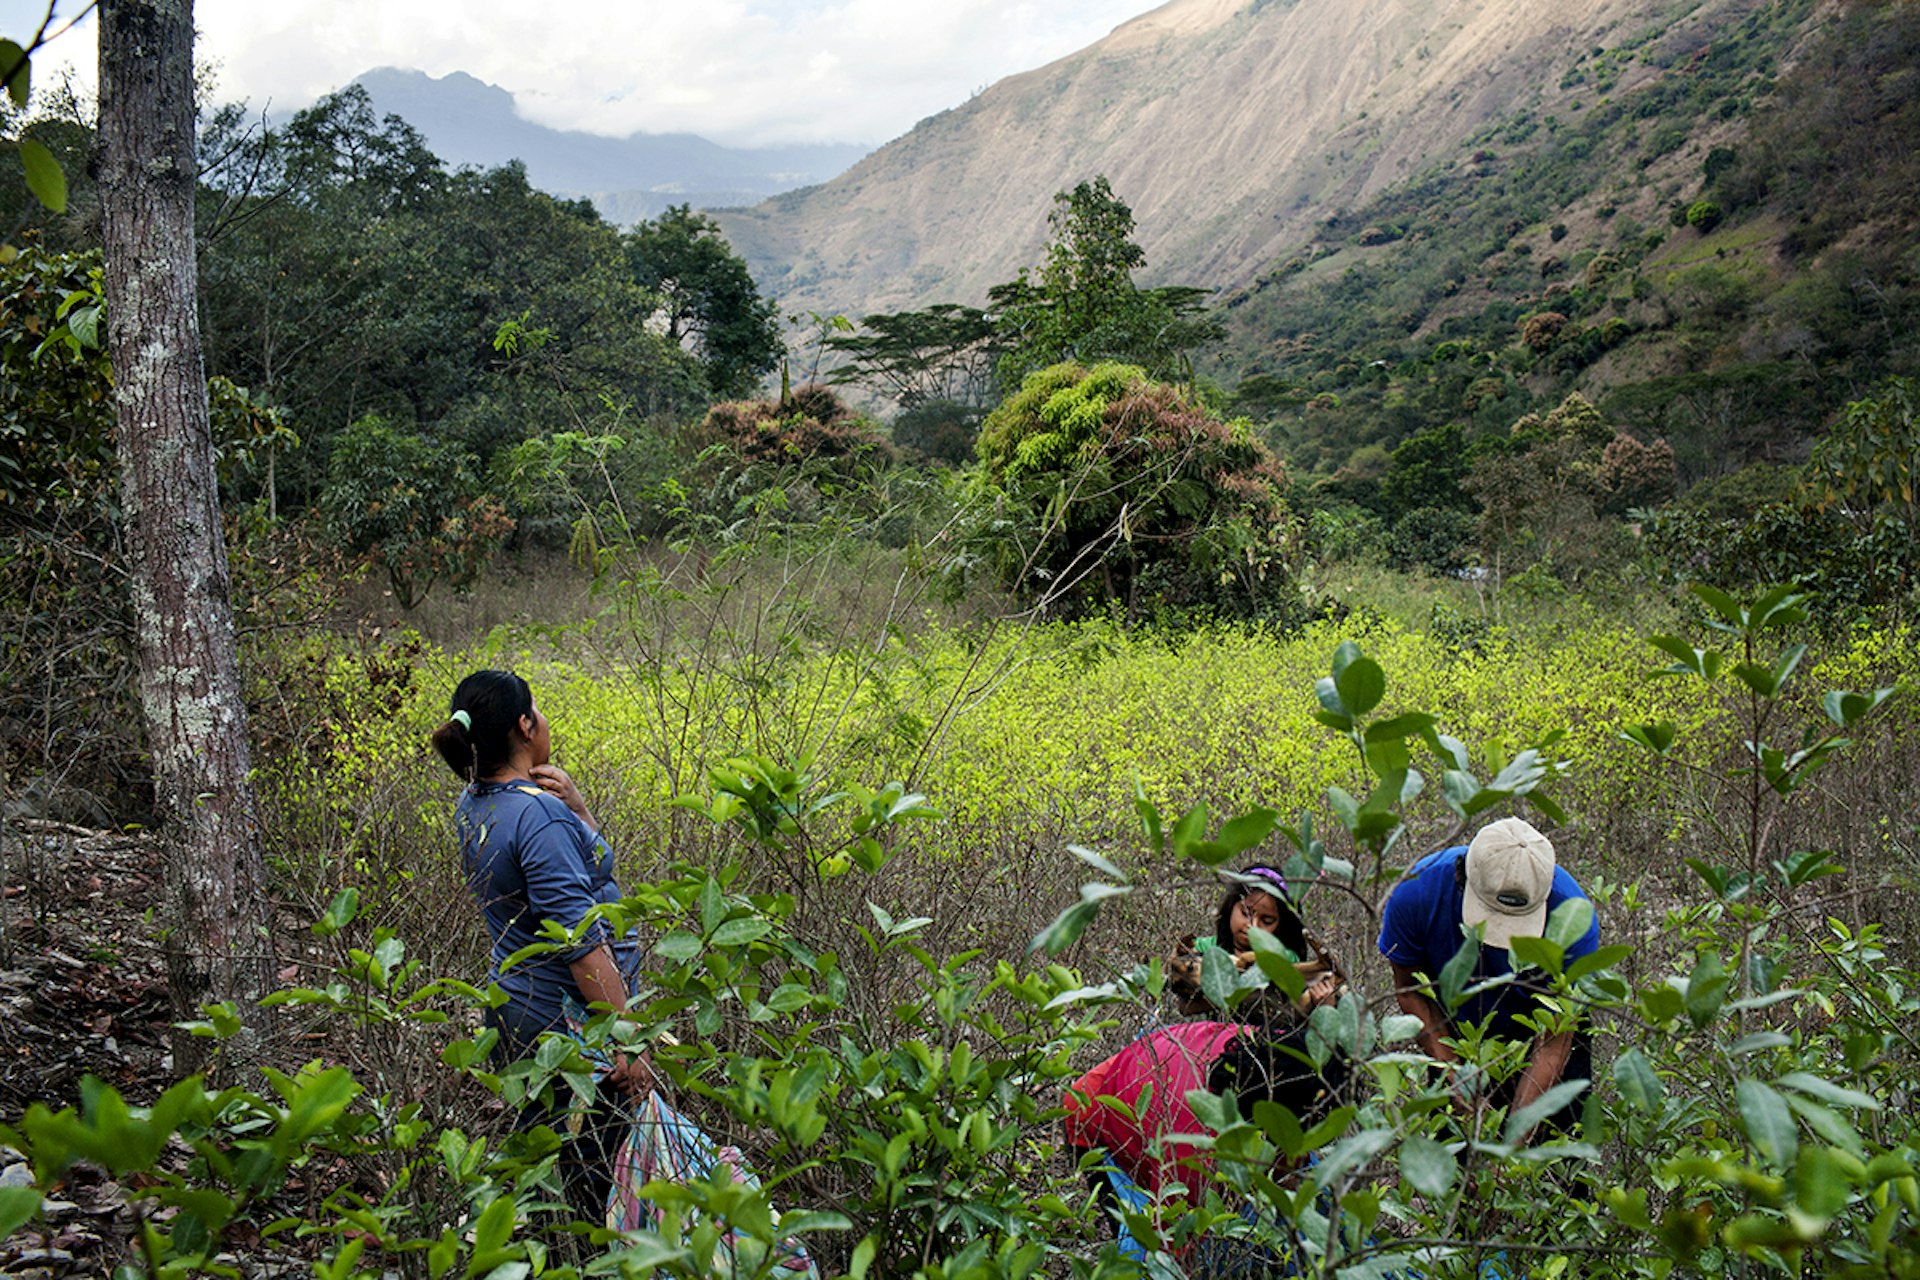 A family harvesting coca leaves in the town of Santa Rosa, Peru, July 28, 2012. In the sacred valley of the Incas to cultivate coca plants it is legal as long as farmers sell it or buy it from ENACO (National Coca Enterprise), something farmers don't entirely agreed with, since the company fixes the prices and buys coca leaves at low rates. Also, the leaves can not be brought outside the valley. © Carlos Villalon 